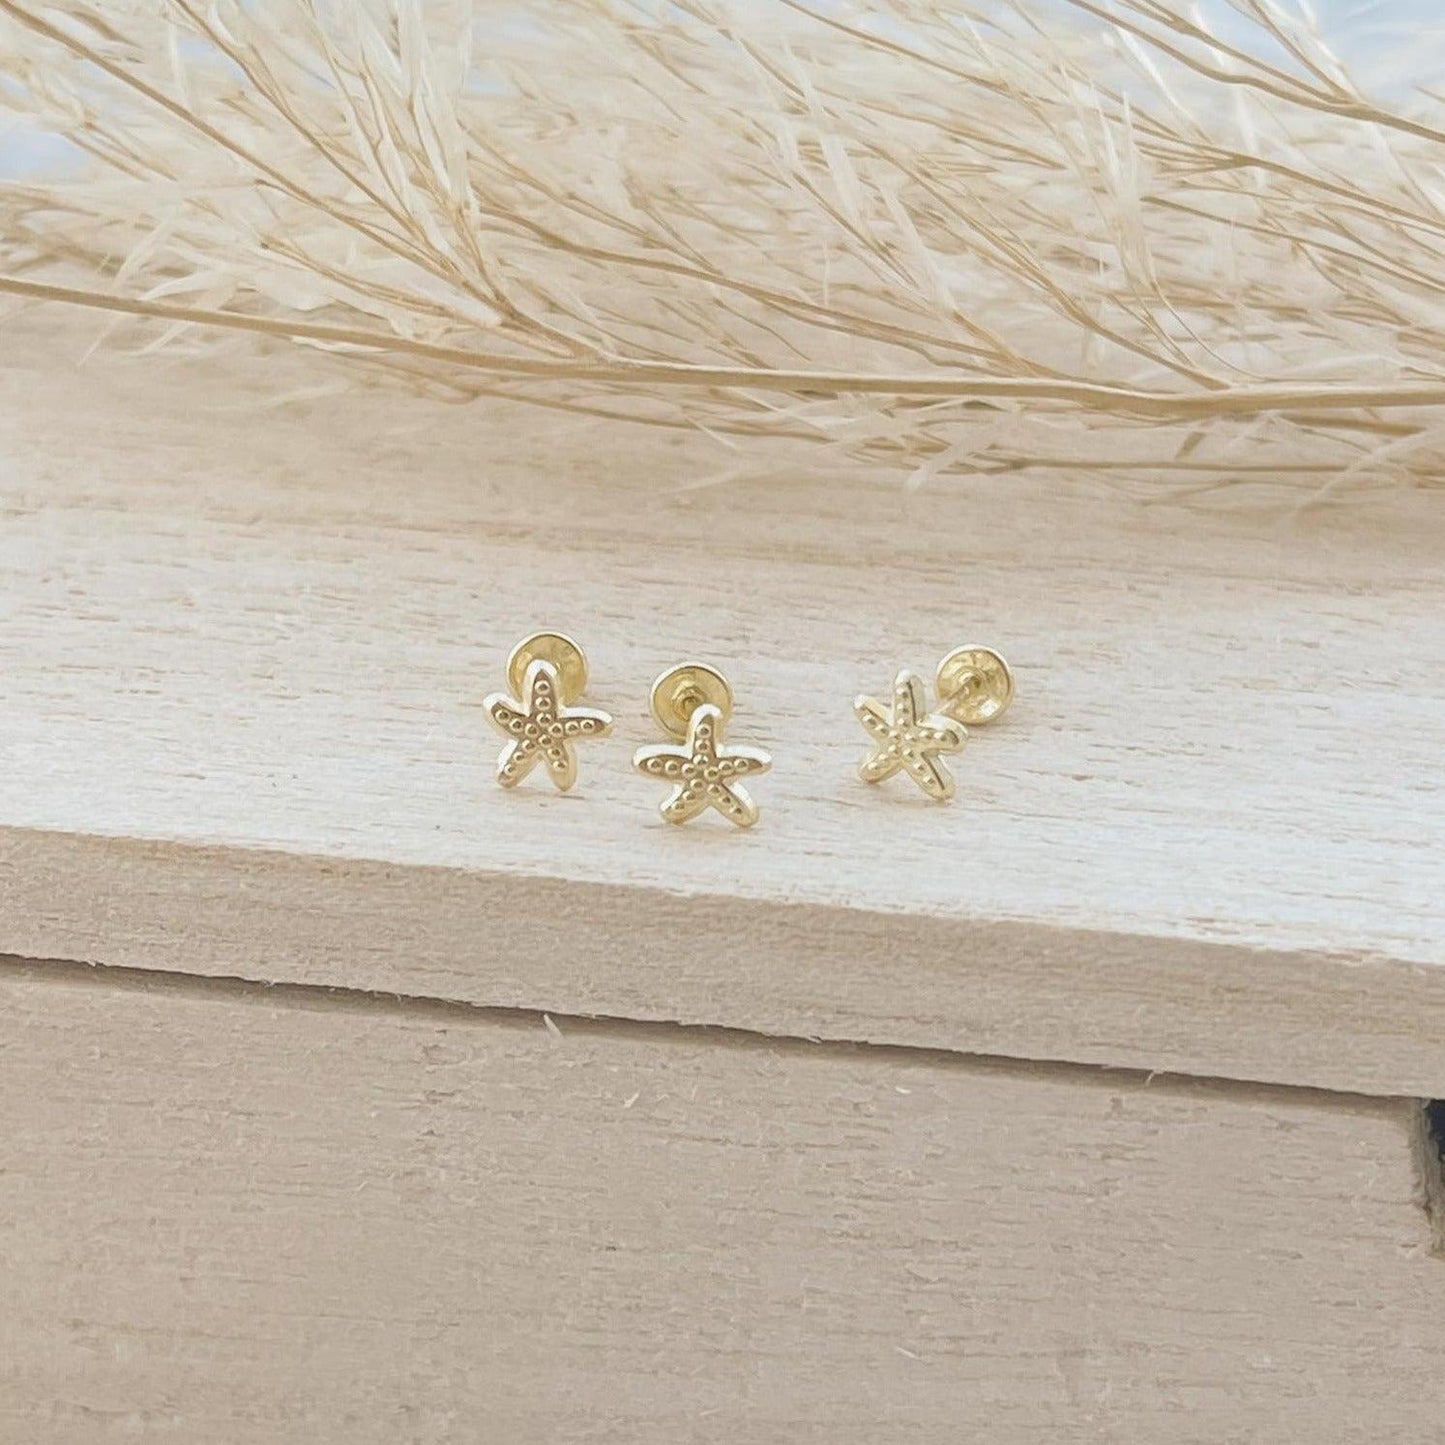 Load image into Gallery viewer, 10K Gold Sea Starfish Earrings - Liv.Aura Jewelry
